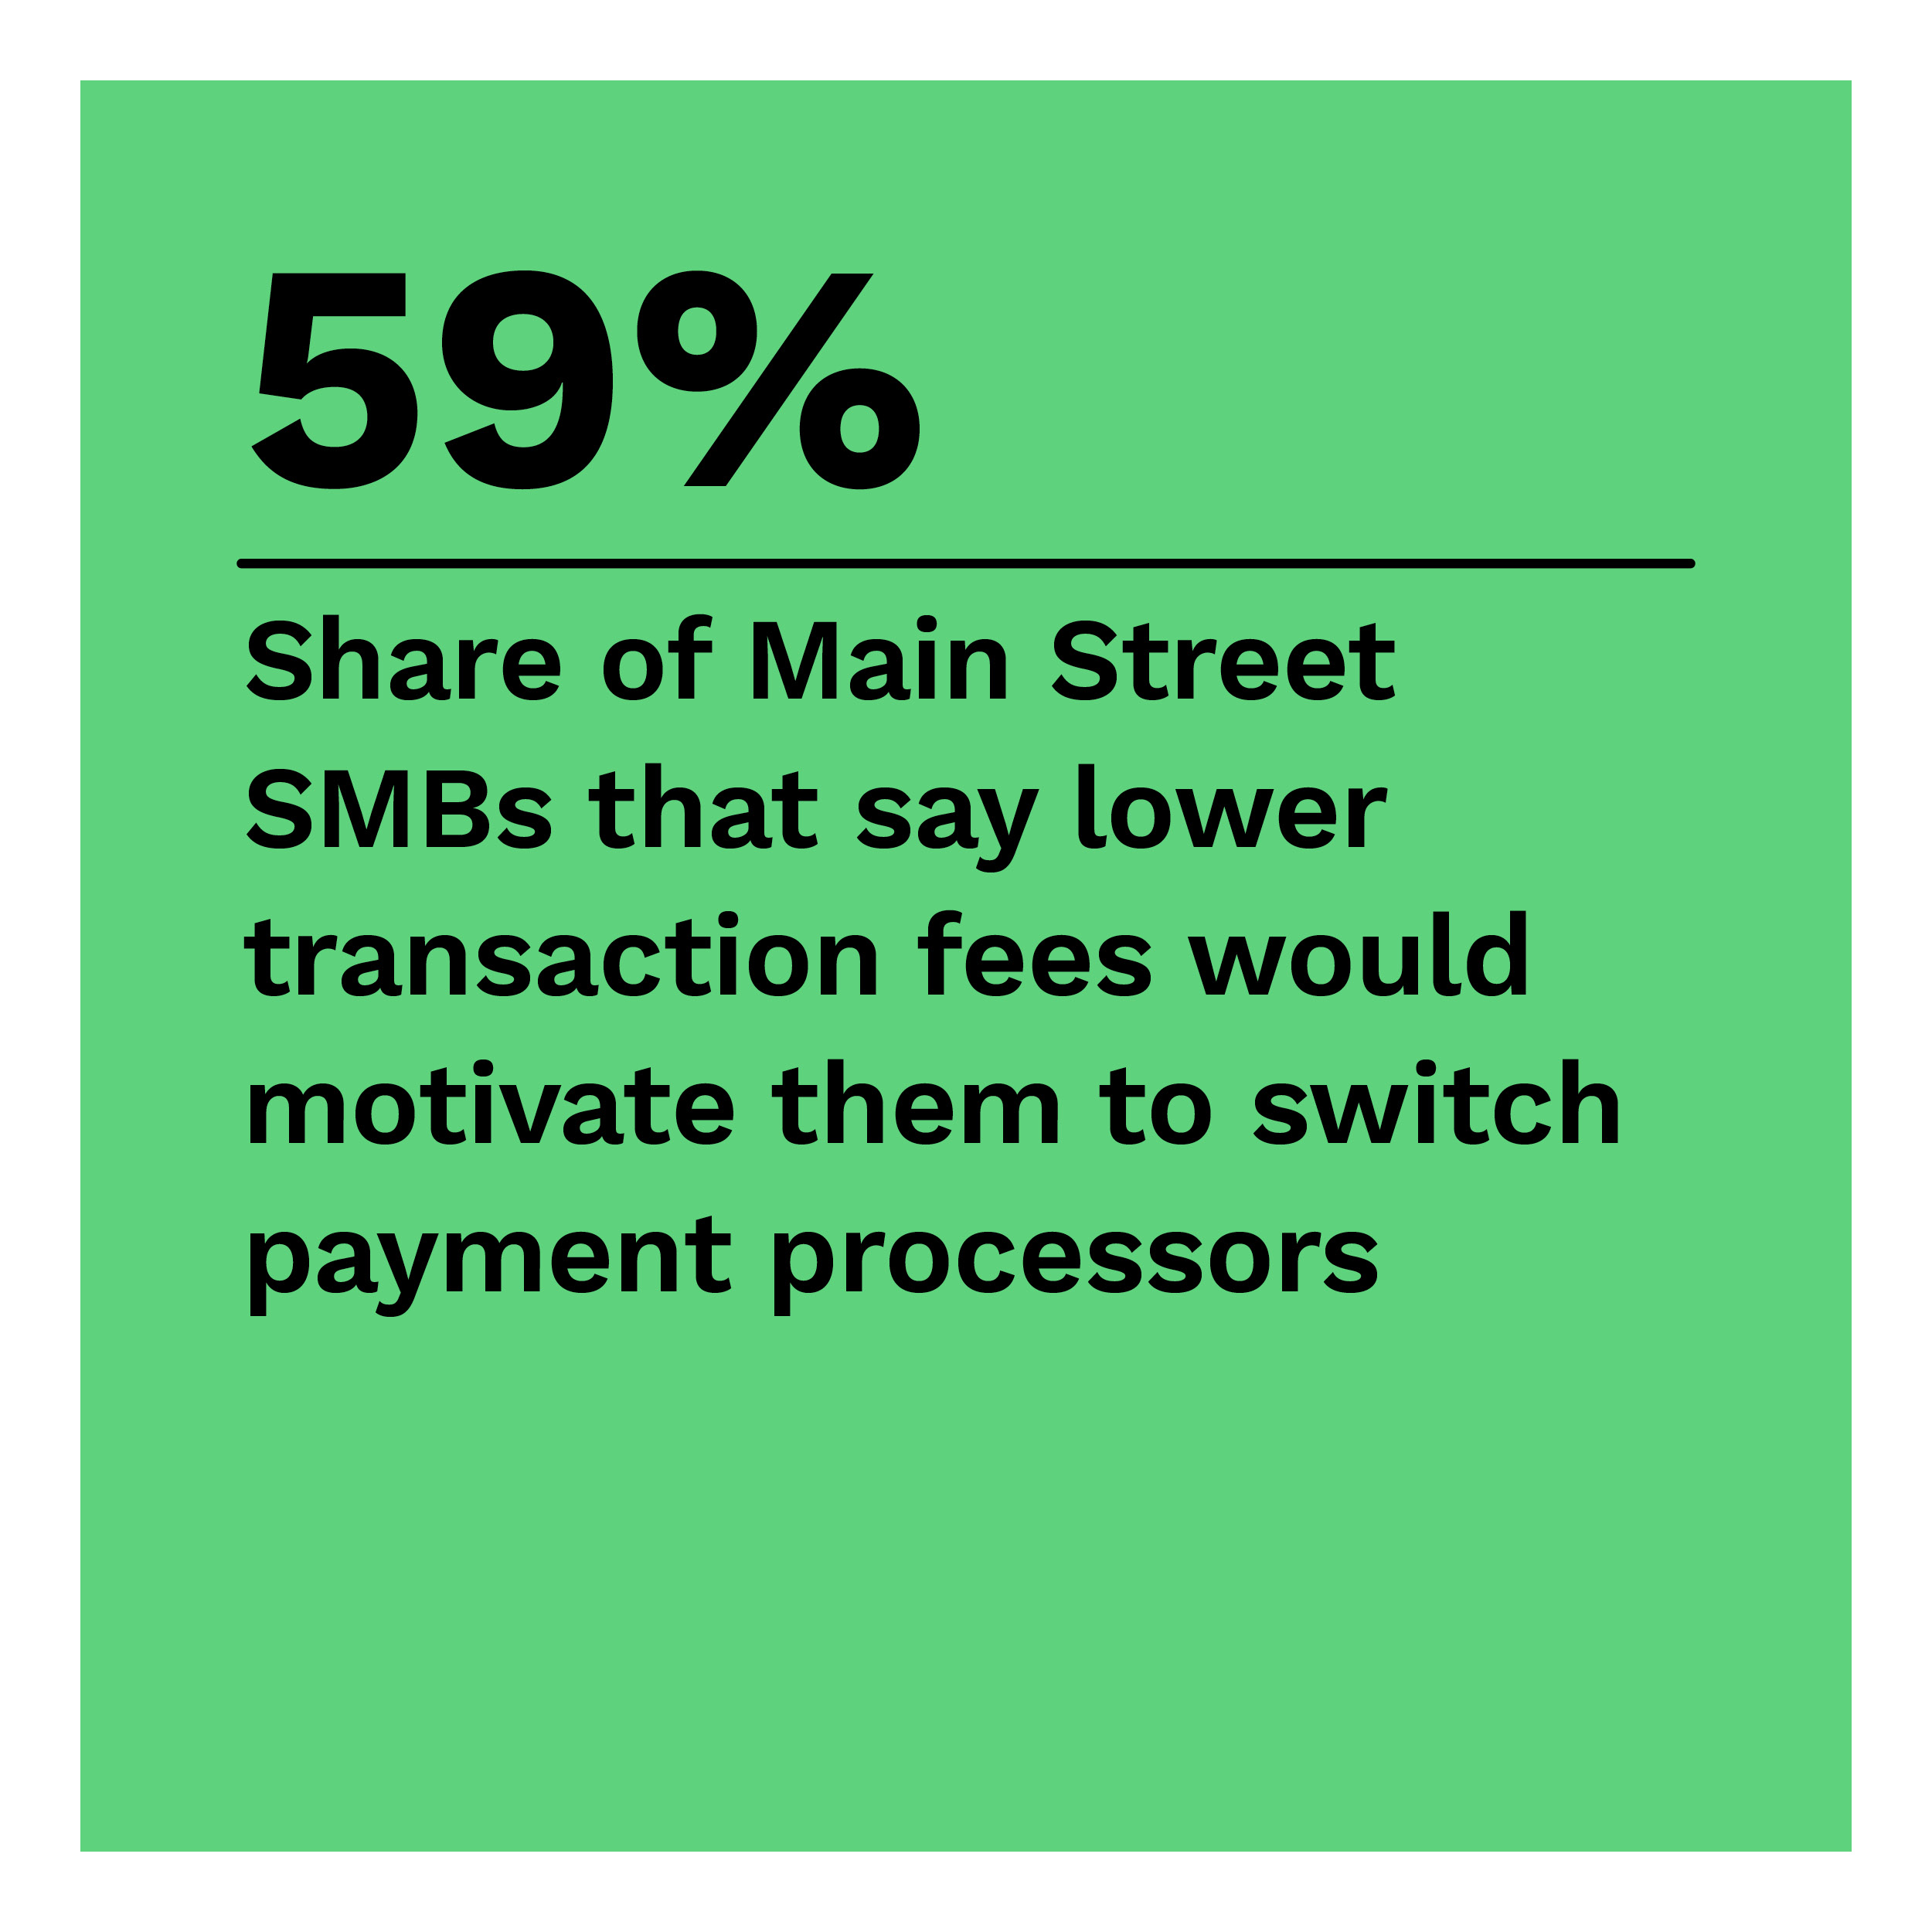 59%: Portion of Main Street SMBs that say lower transaction fees would motivate them to switch payment processors